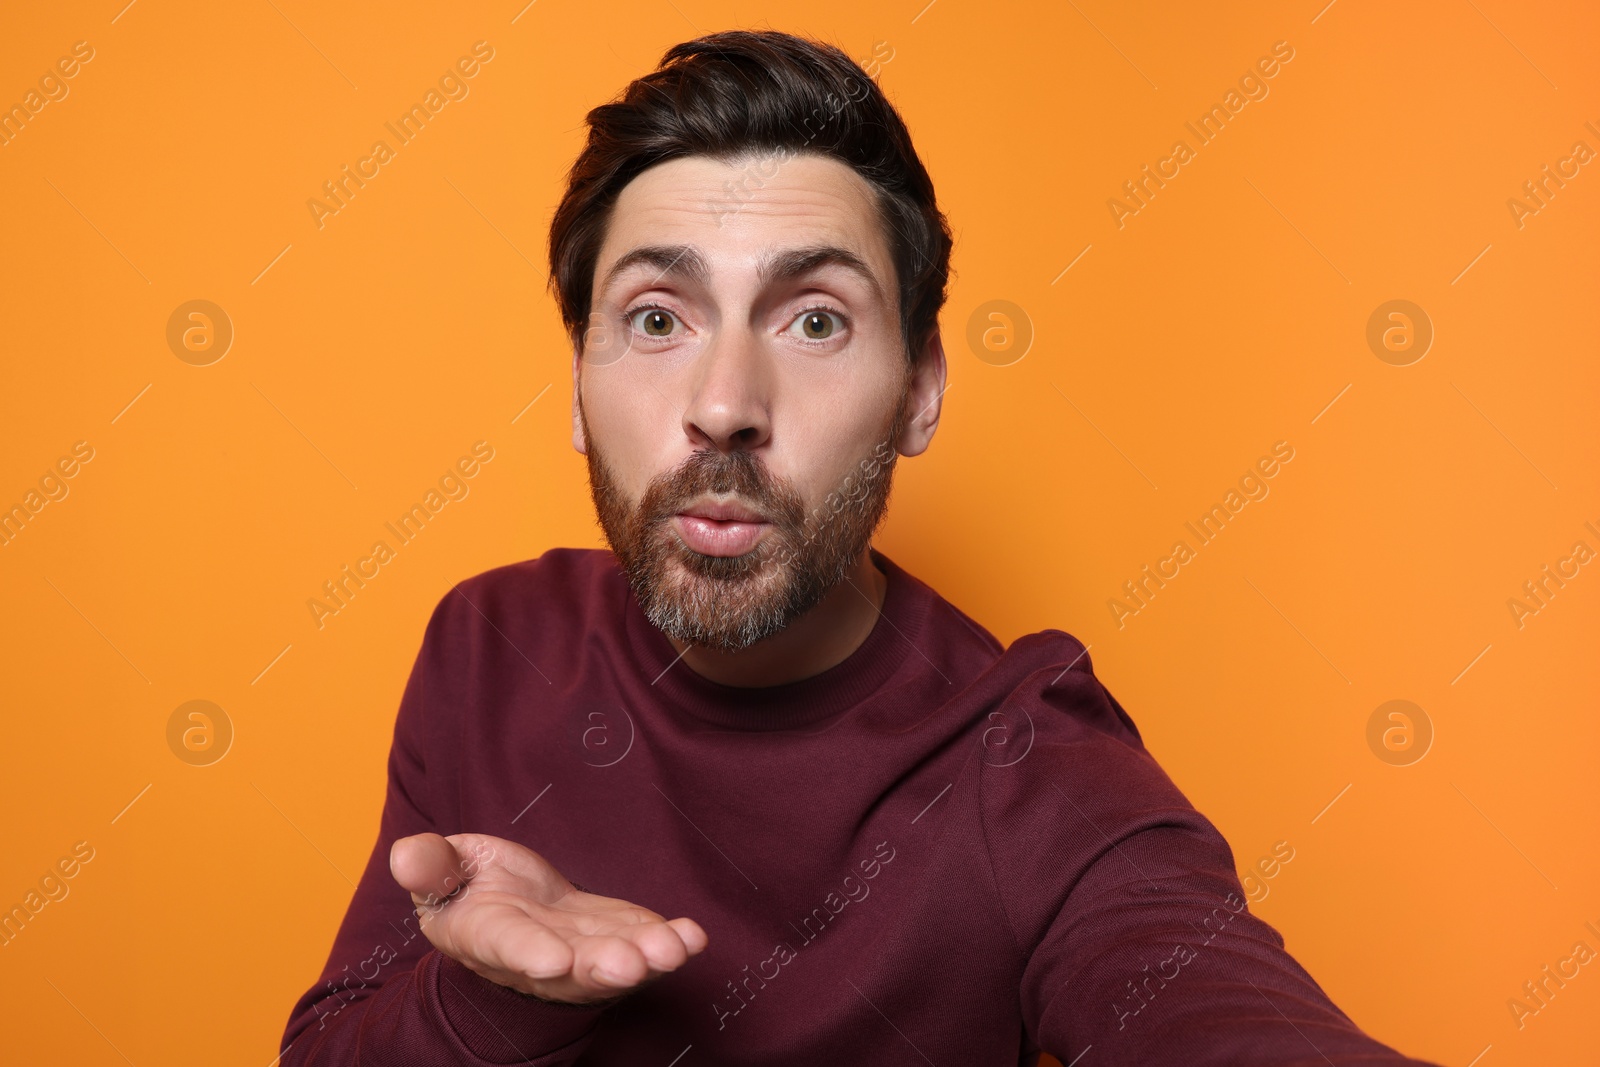 Photo of Handsome man blowing kiss while taking selfie on orange background